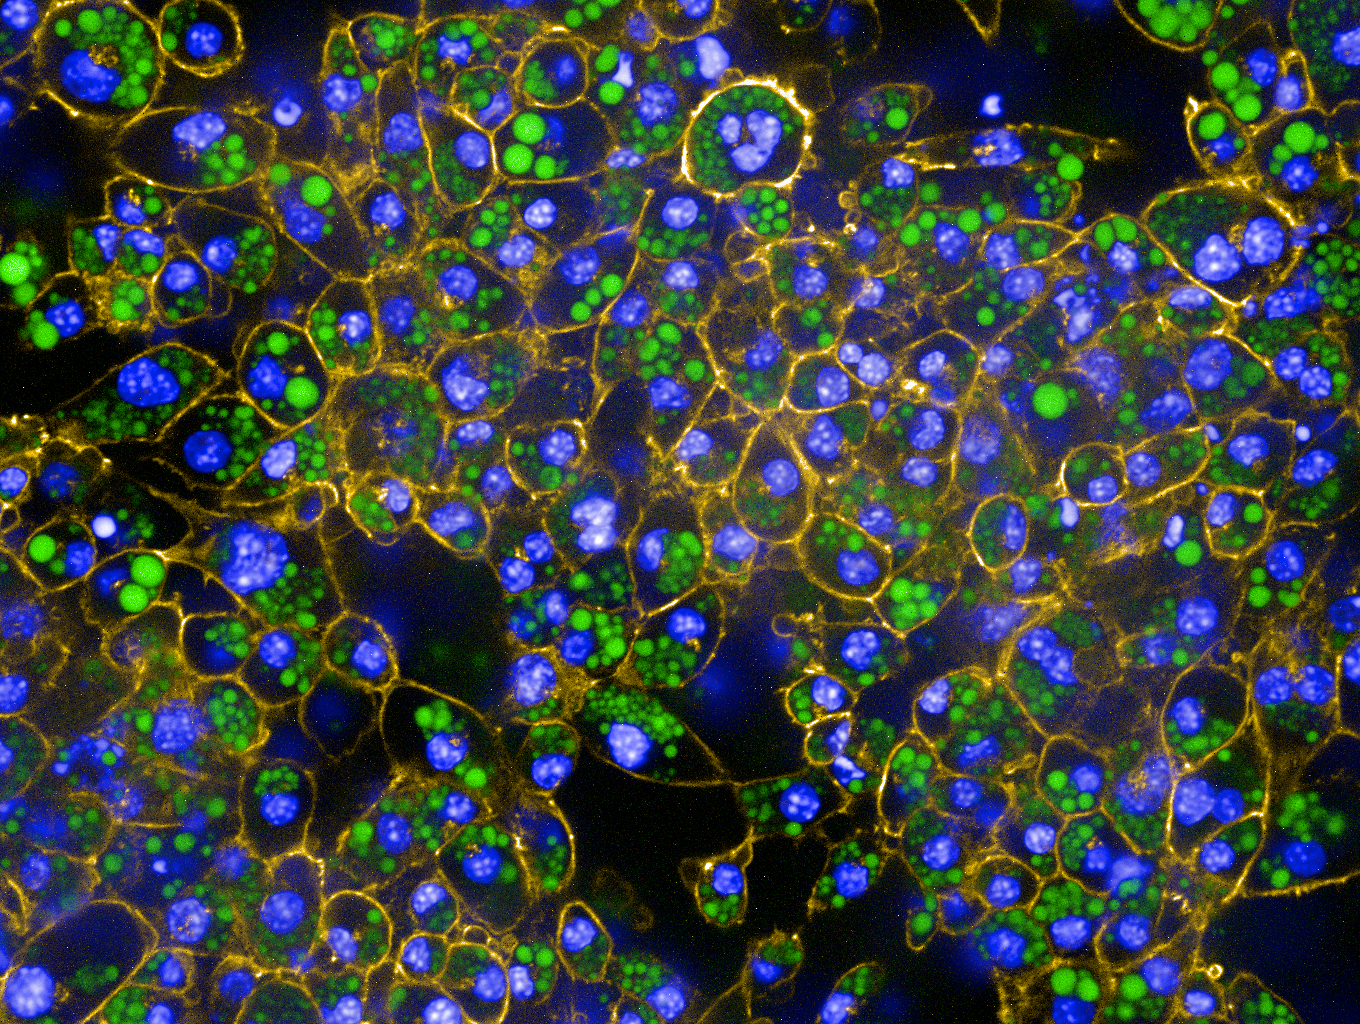 Caption: In vitro differentiated murine brown adipocytes stained for lipids (green), F-actin (red) and DNA (blue). Photo credit: Ruth Karlina and Kenji Schorpp, Helmholtz Zentrum München.